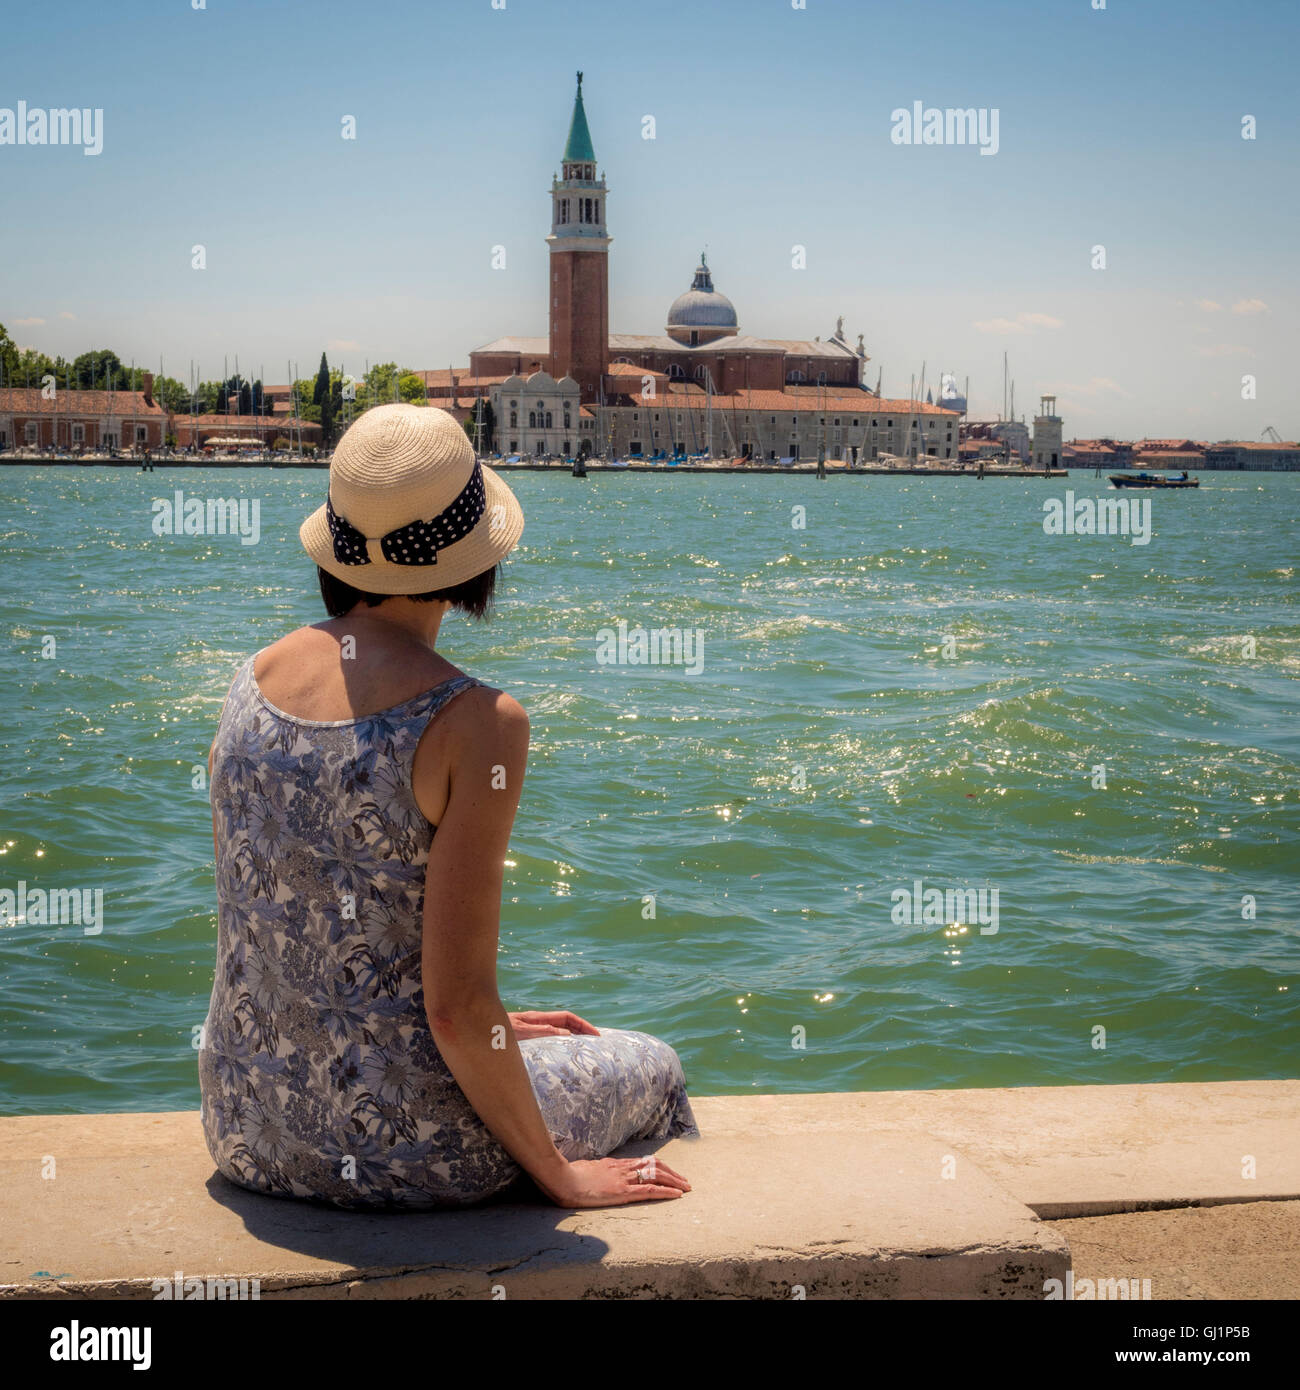 Rear view of single female, wearing a straw hat, sitting on a bench looking across to the church and island of San Giorgio Maggi Stock Photo